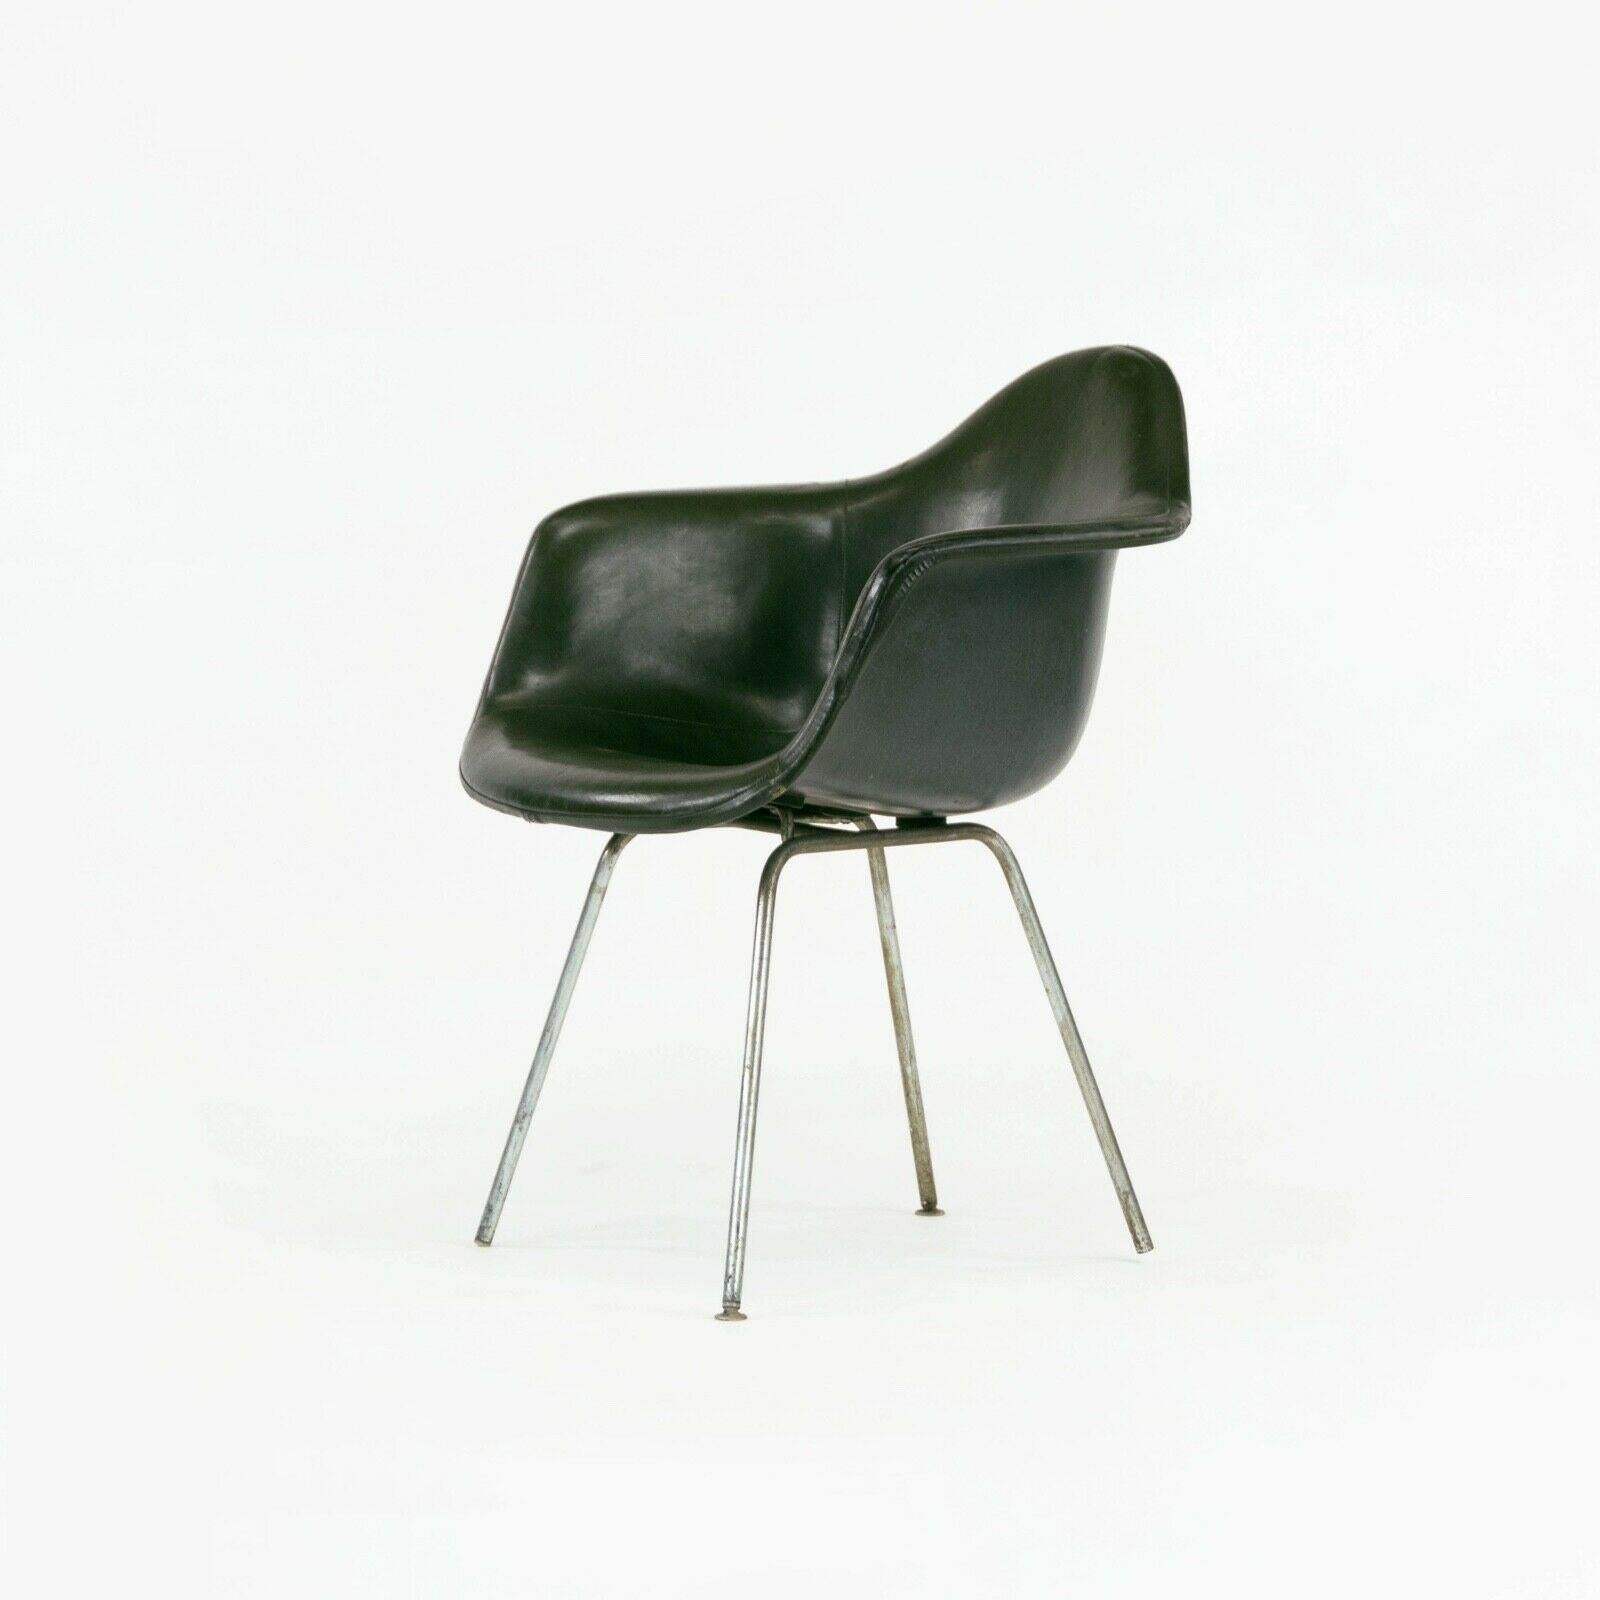 1959 Herman Miller Eames DAX Fiberglass Arm Shell Chair with Green Removable Pad For Sale 2